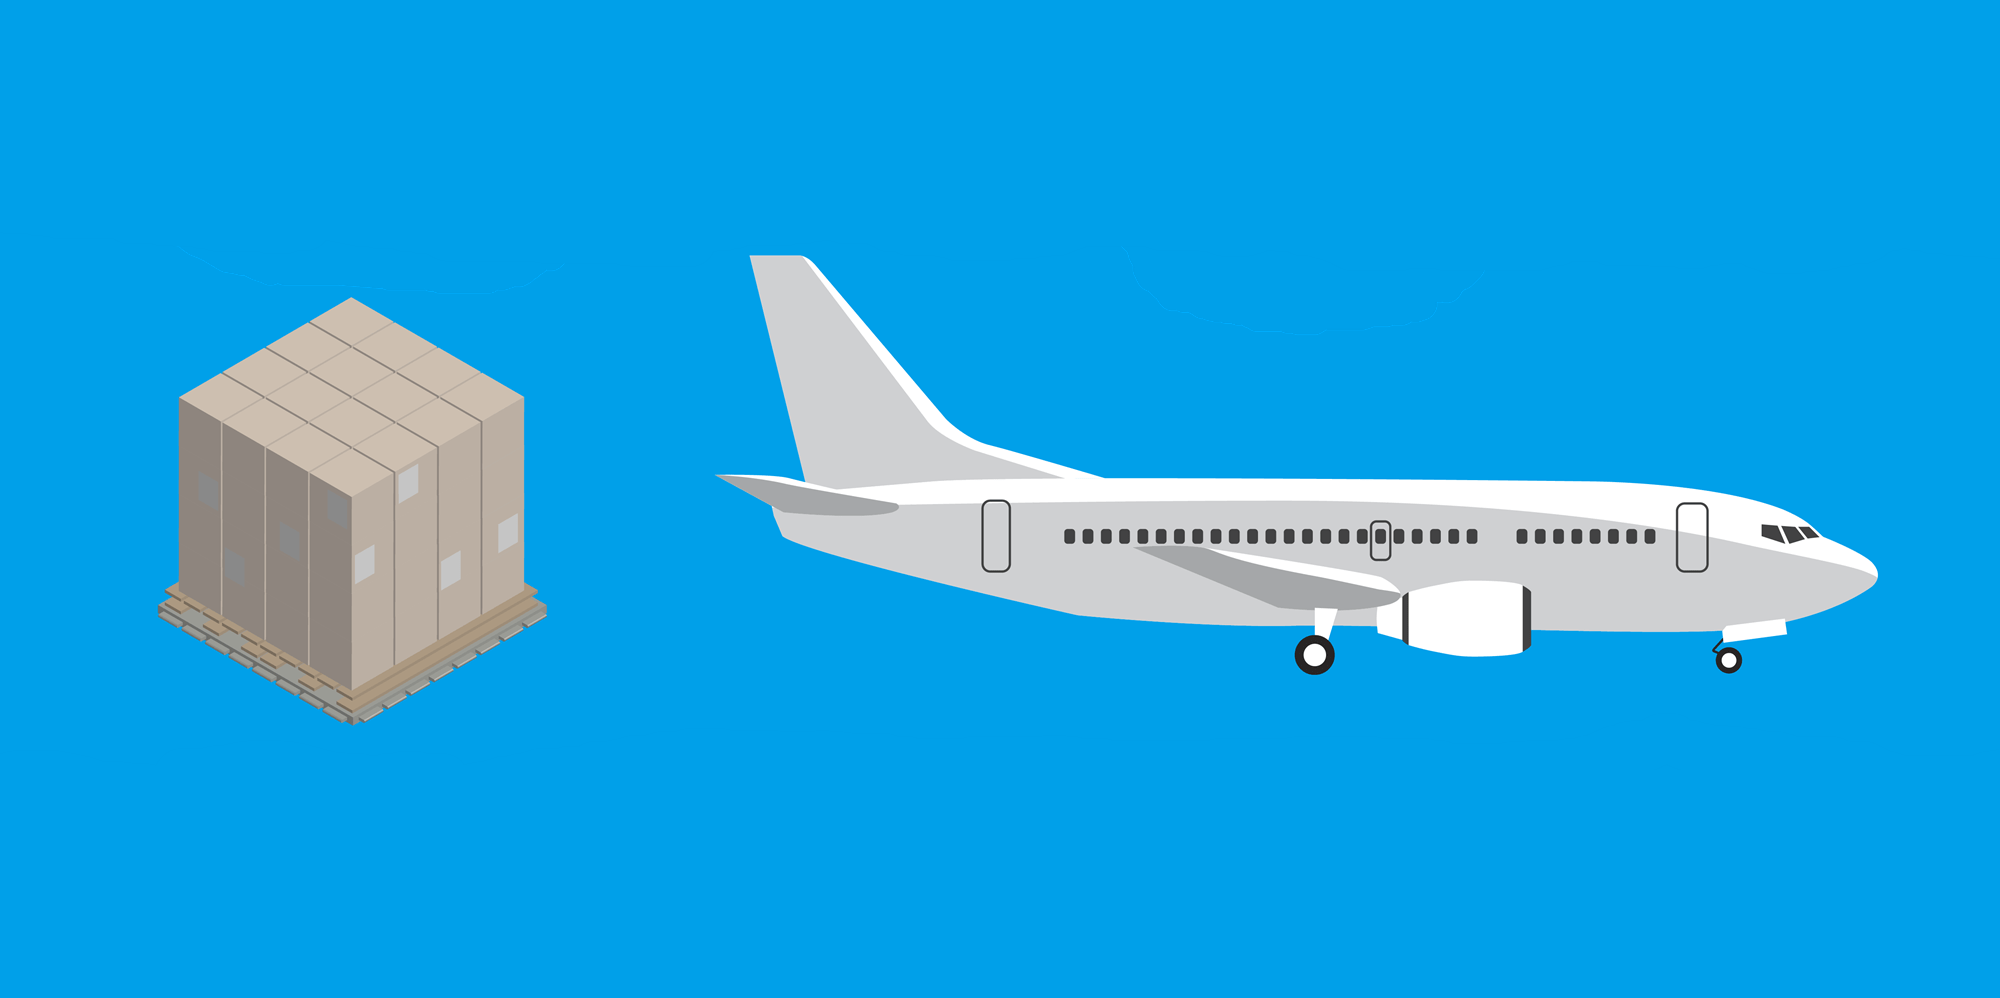 Illustration of a unit loading device (ULD) next to an airplane.